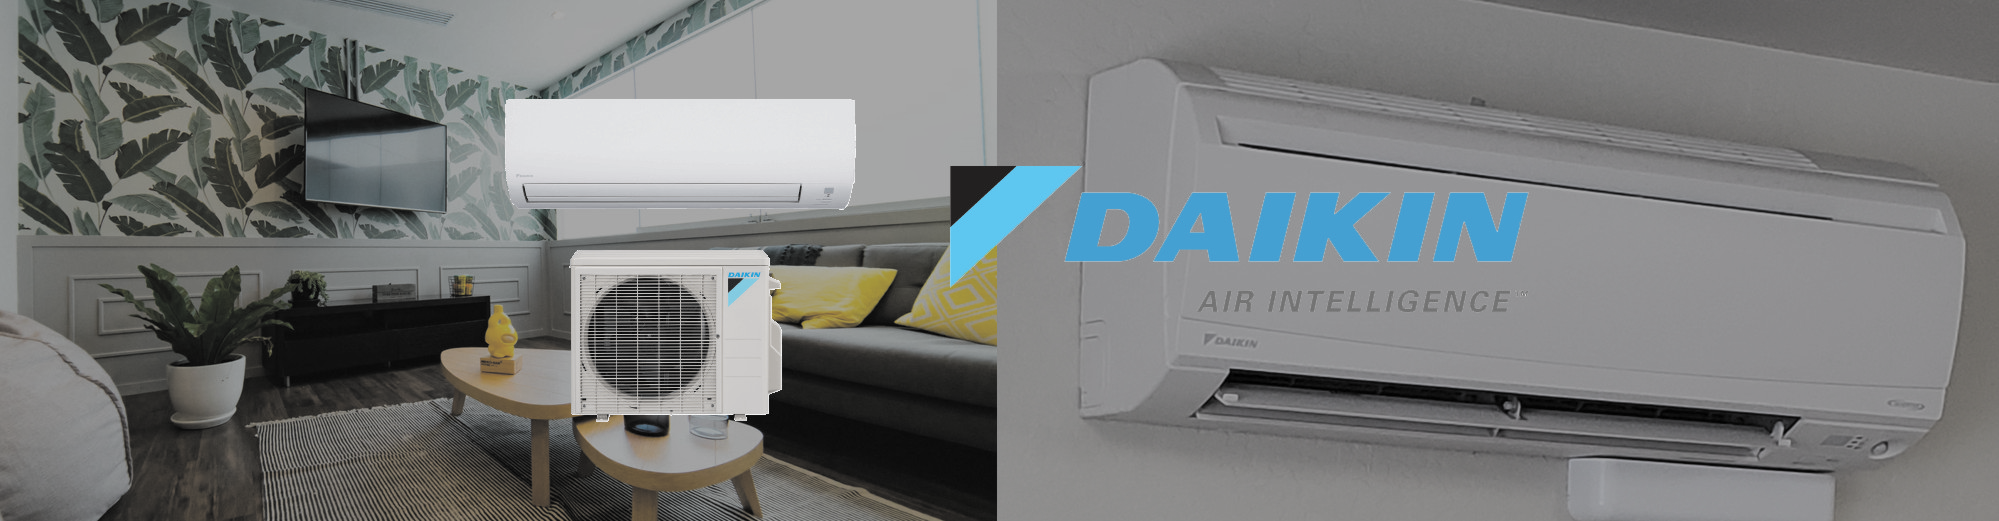 Ductless HVAC Services In Centerville, Kettering, Beavercreek, OH and Surrounding Areas